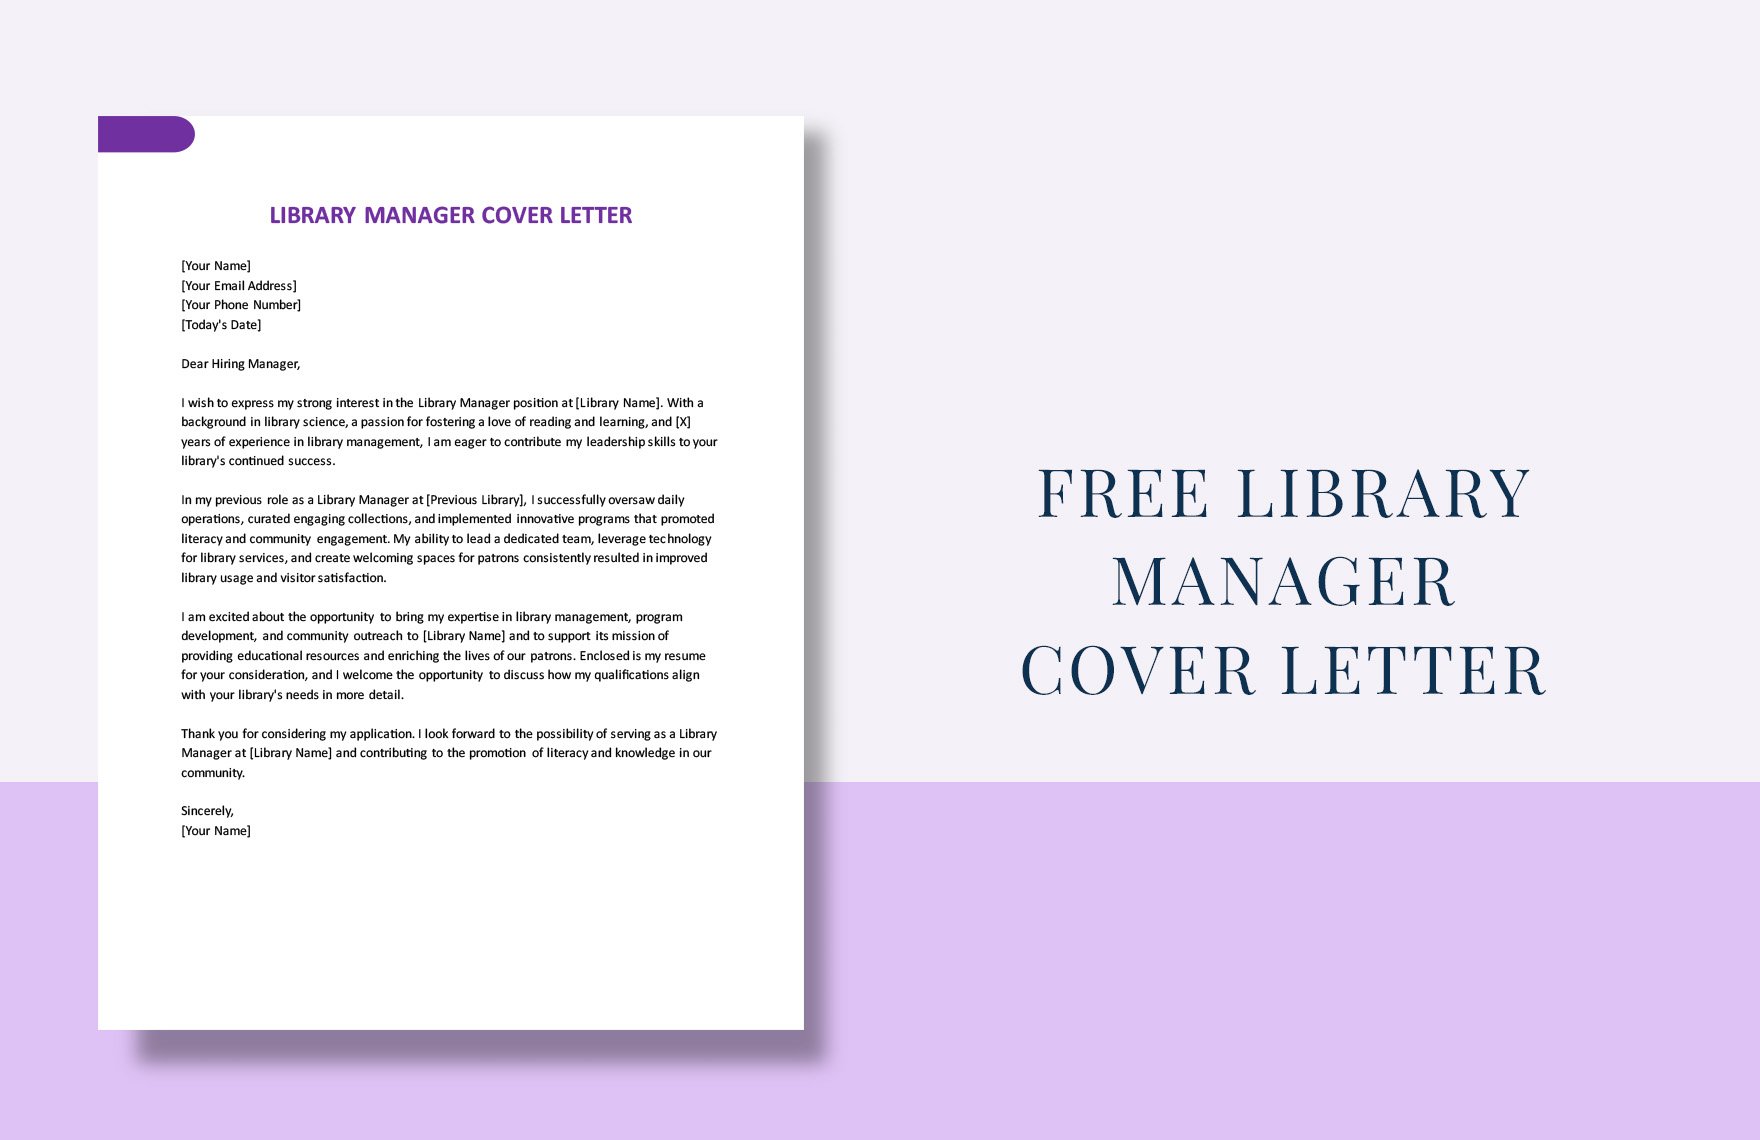 Library Manager Cover Letter in Word, Google Docs, PDF